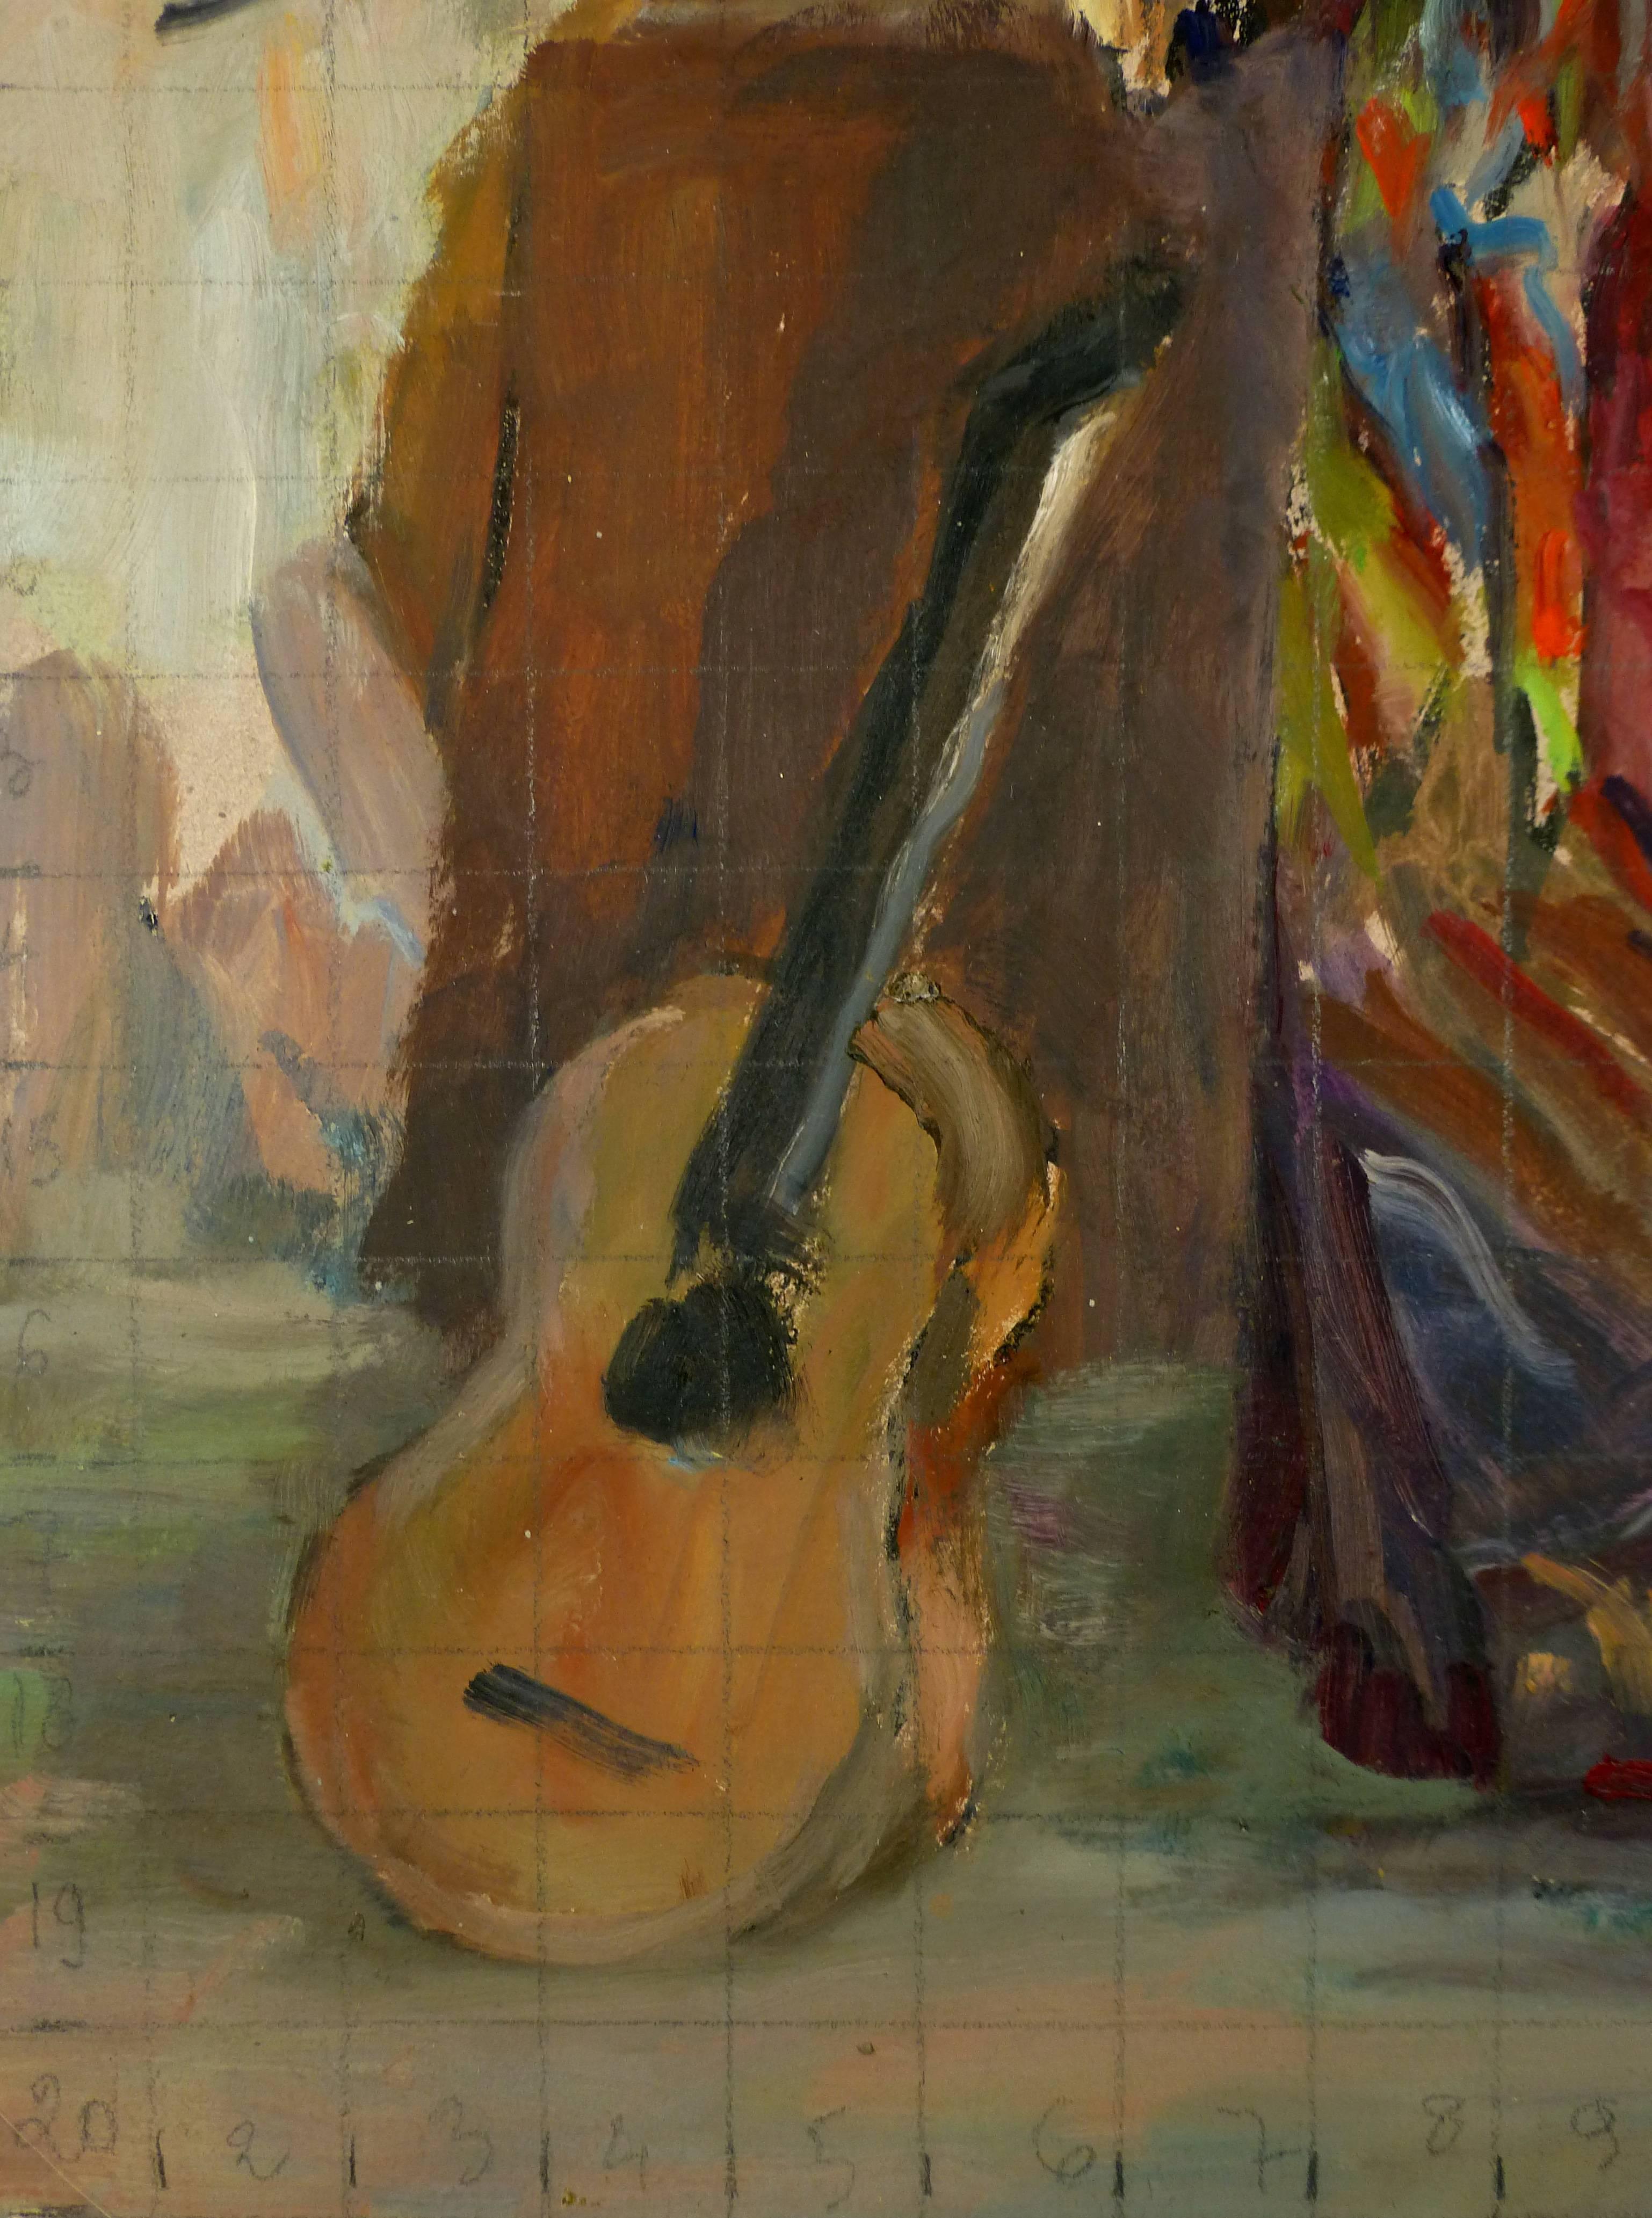 Woman with Guitar - Painting by Raymond Bailly